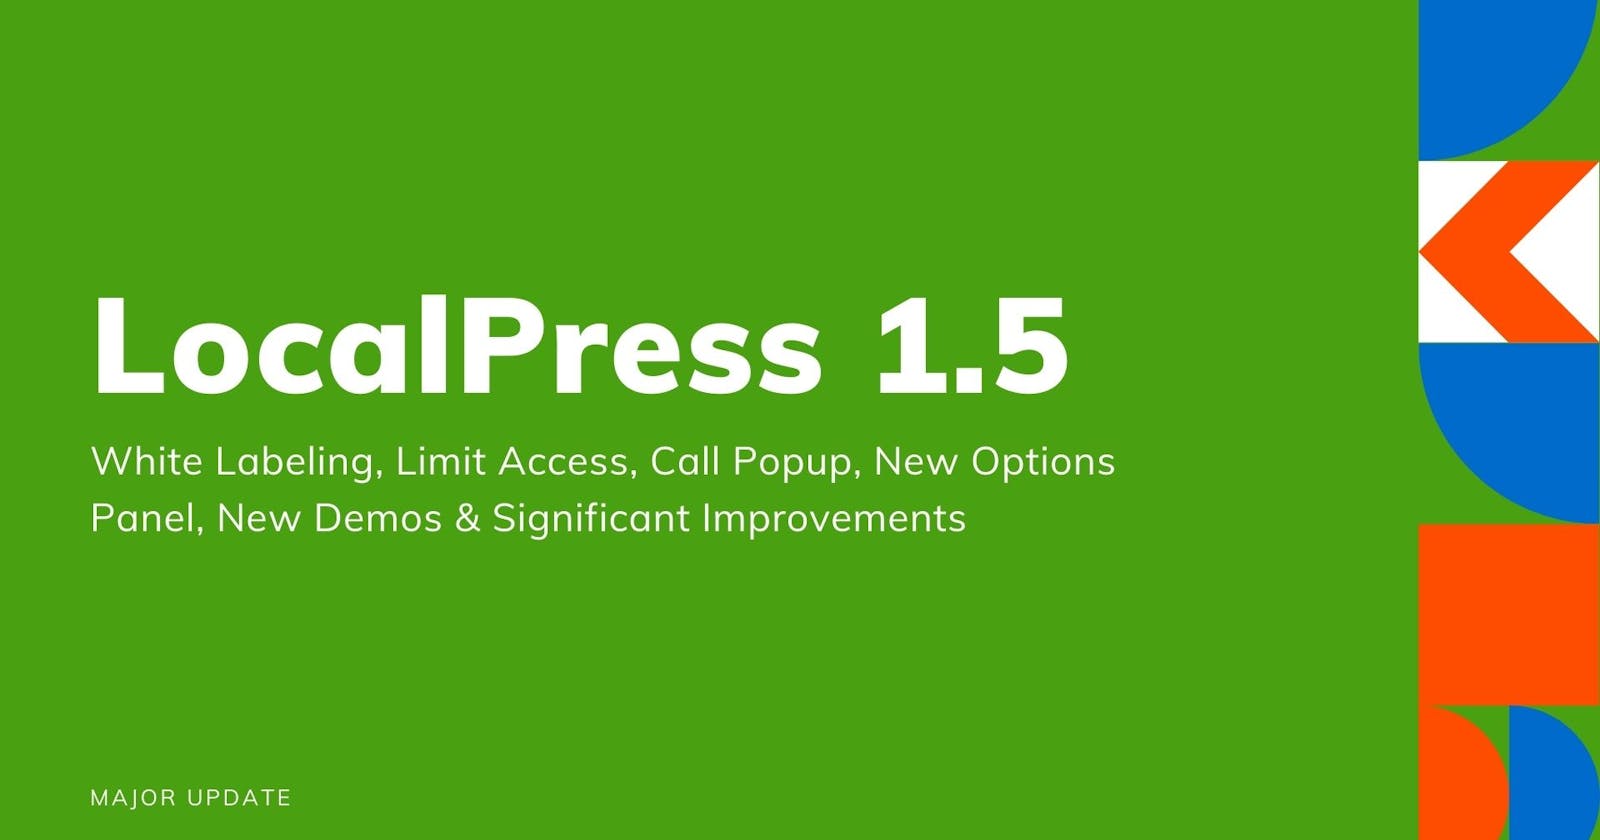 Introducing LocalPress 1.5: White Labeling, Limit Access, Call Popup, New Options Panel & Significant Improvements